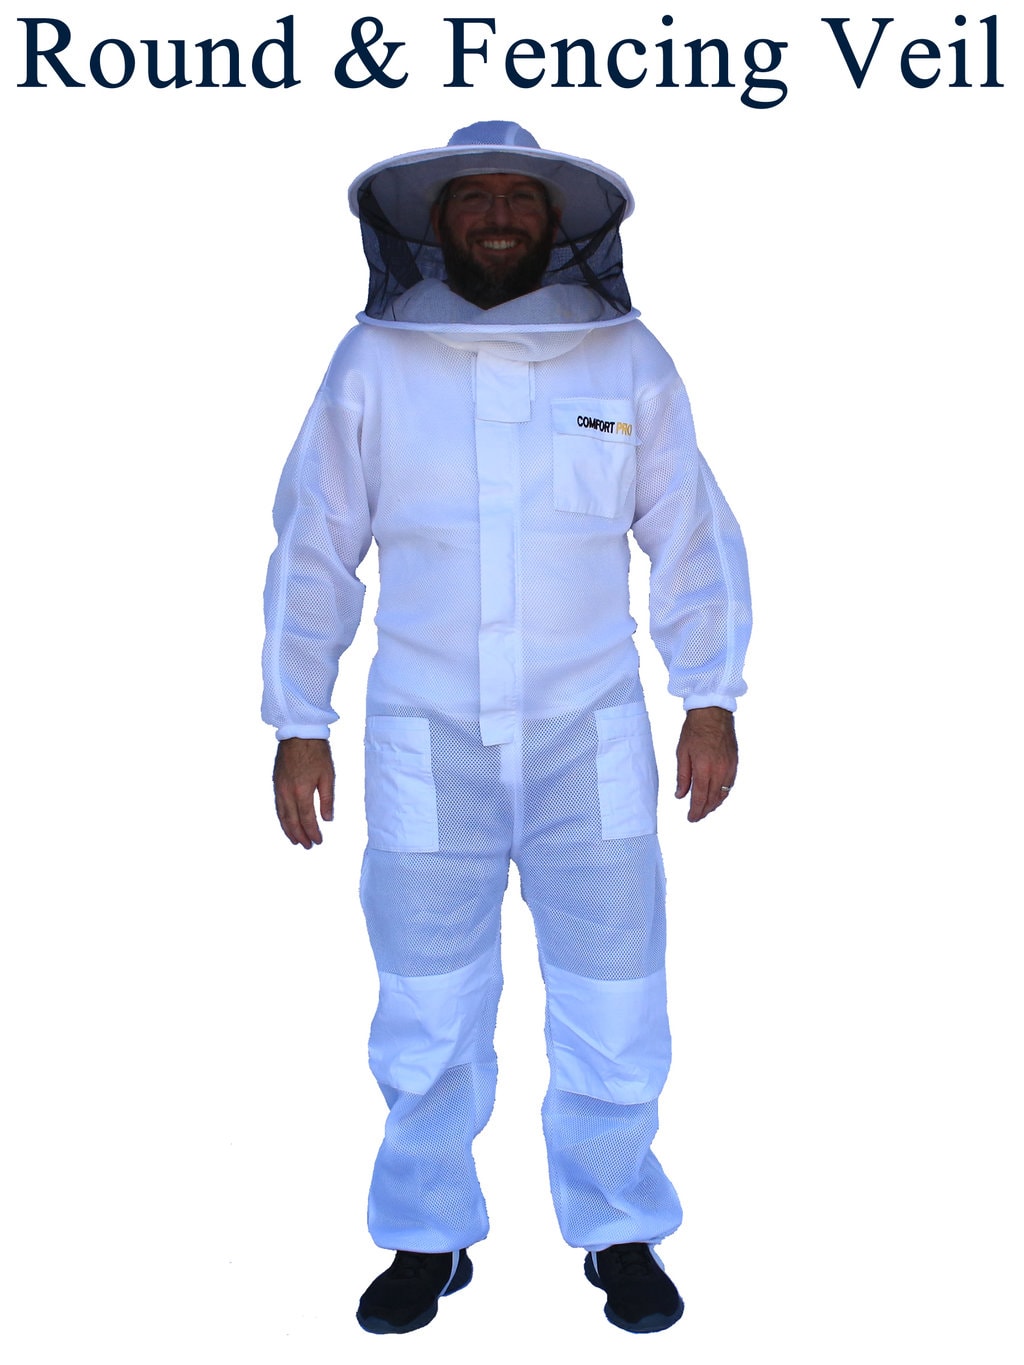 Ventilated Beekeeping Suit with Round Veil and Fencing Veil – Full Suit